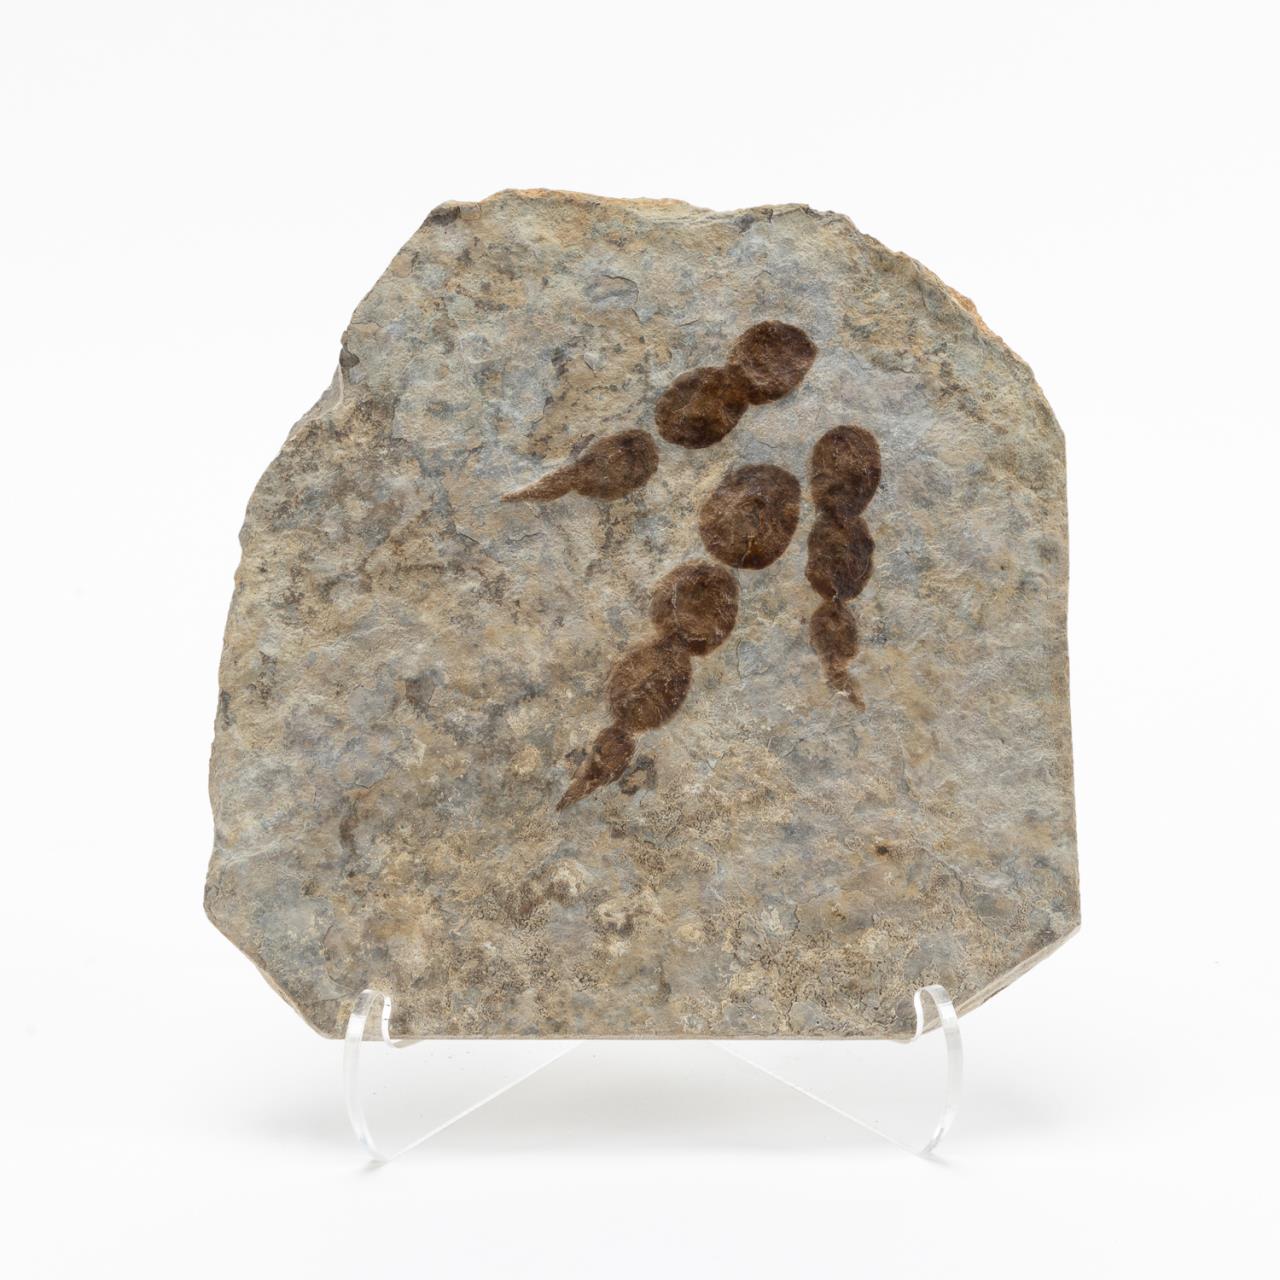 DINOSAUR TRACK FOSSIL ON STAND,